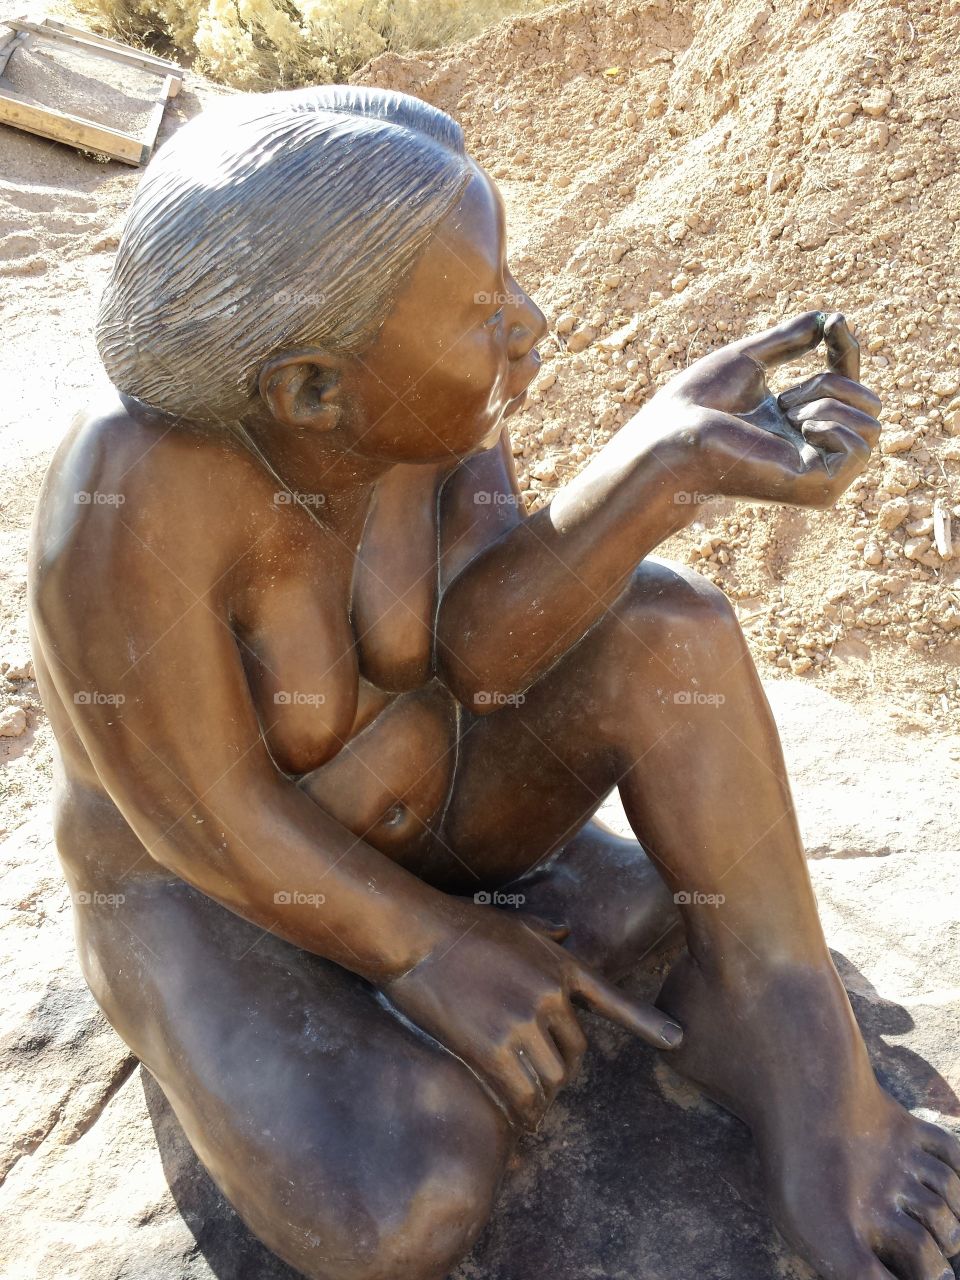 native american bronze. photo taken in New Mexico. woman looking at a kernel of corn